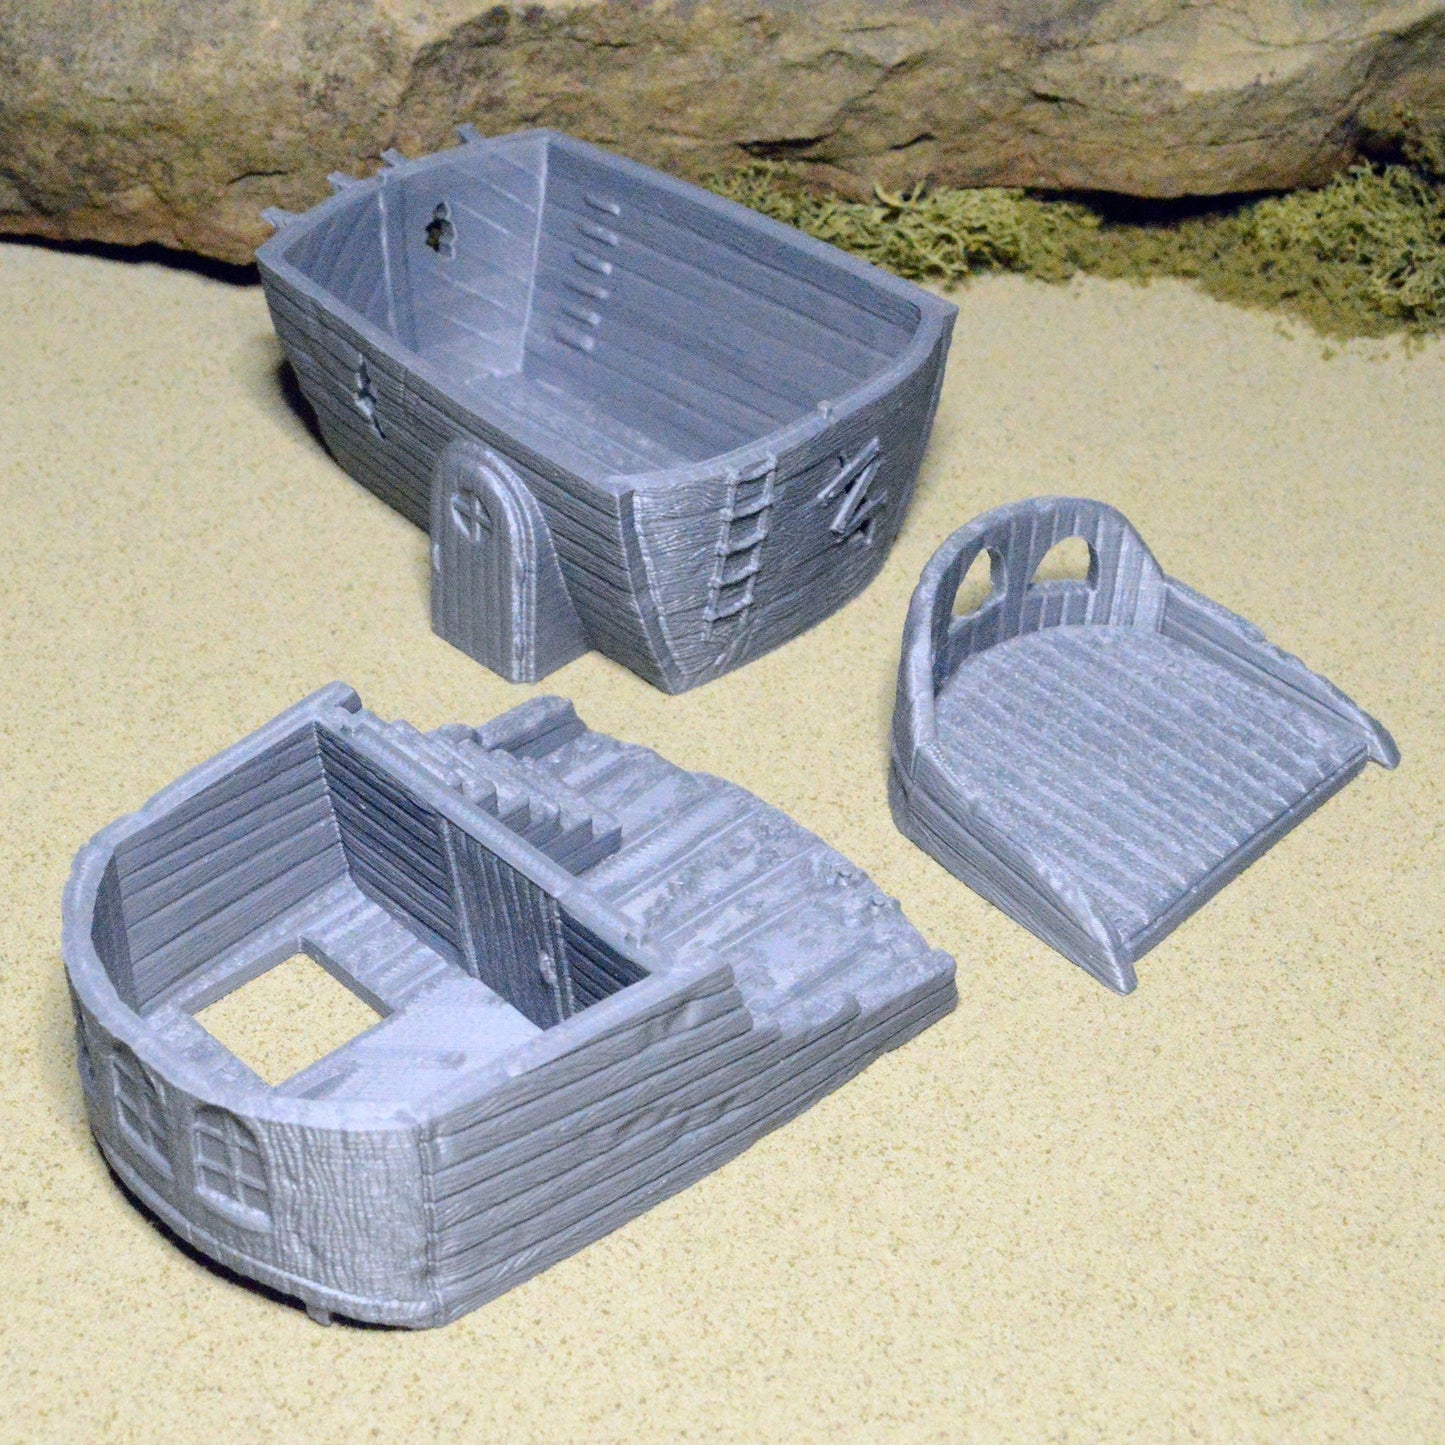 Ship Shack 15mm 28mm 32mm for D&D Terrain, DnD Pathfinder Pirate Coastal Shanty, Depths of Savage Atoll